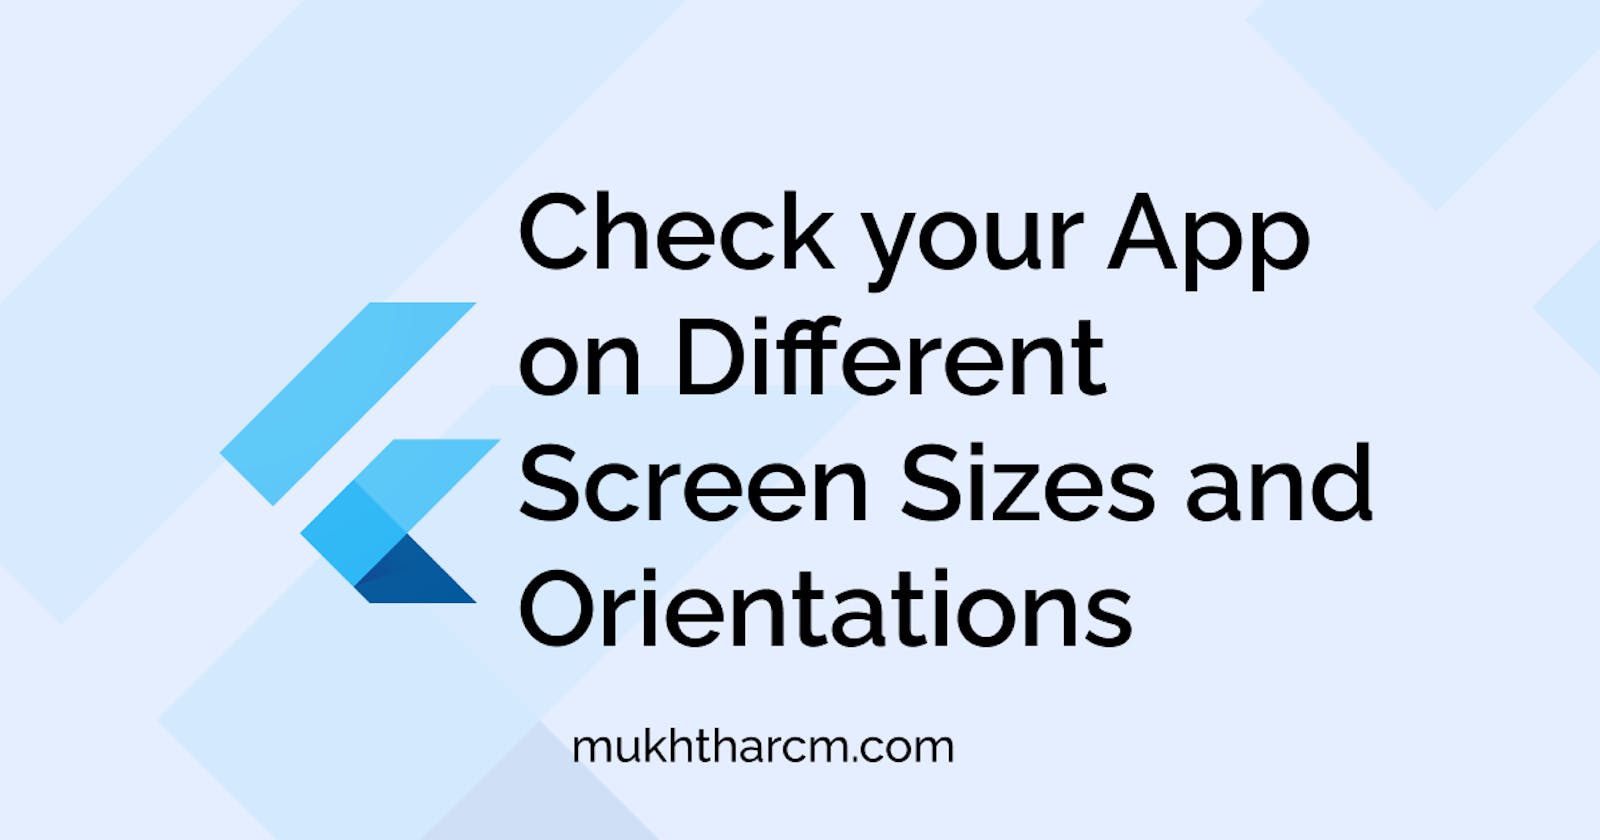 Check App on Different Screen Sizes and Orientations